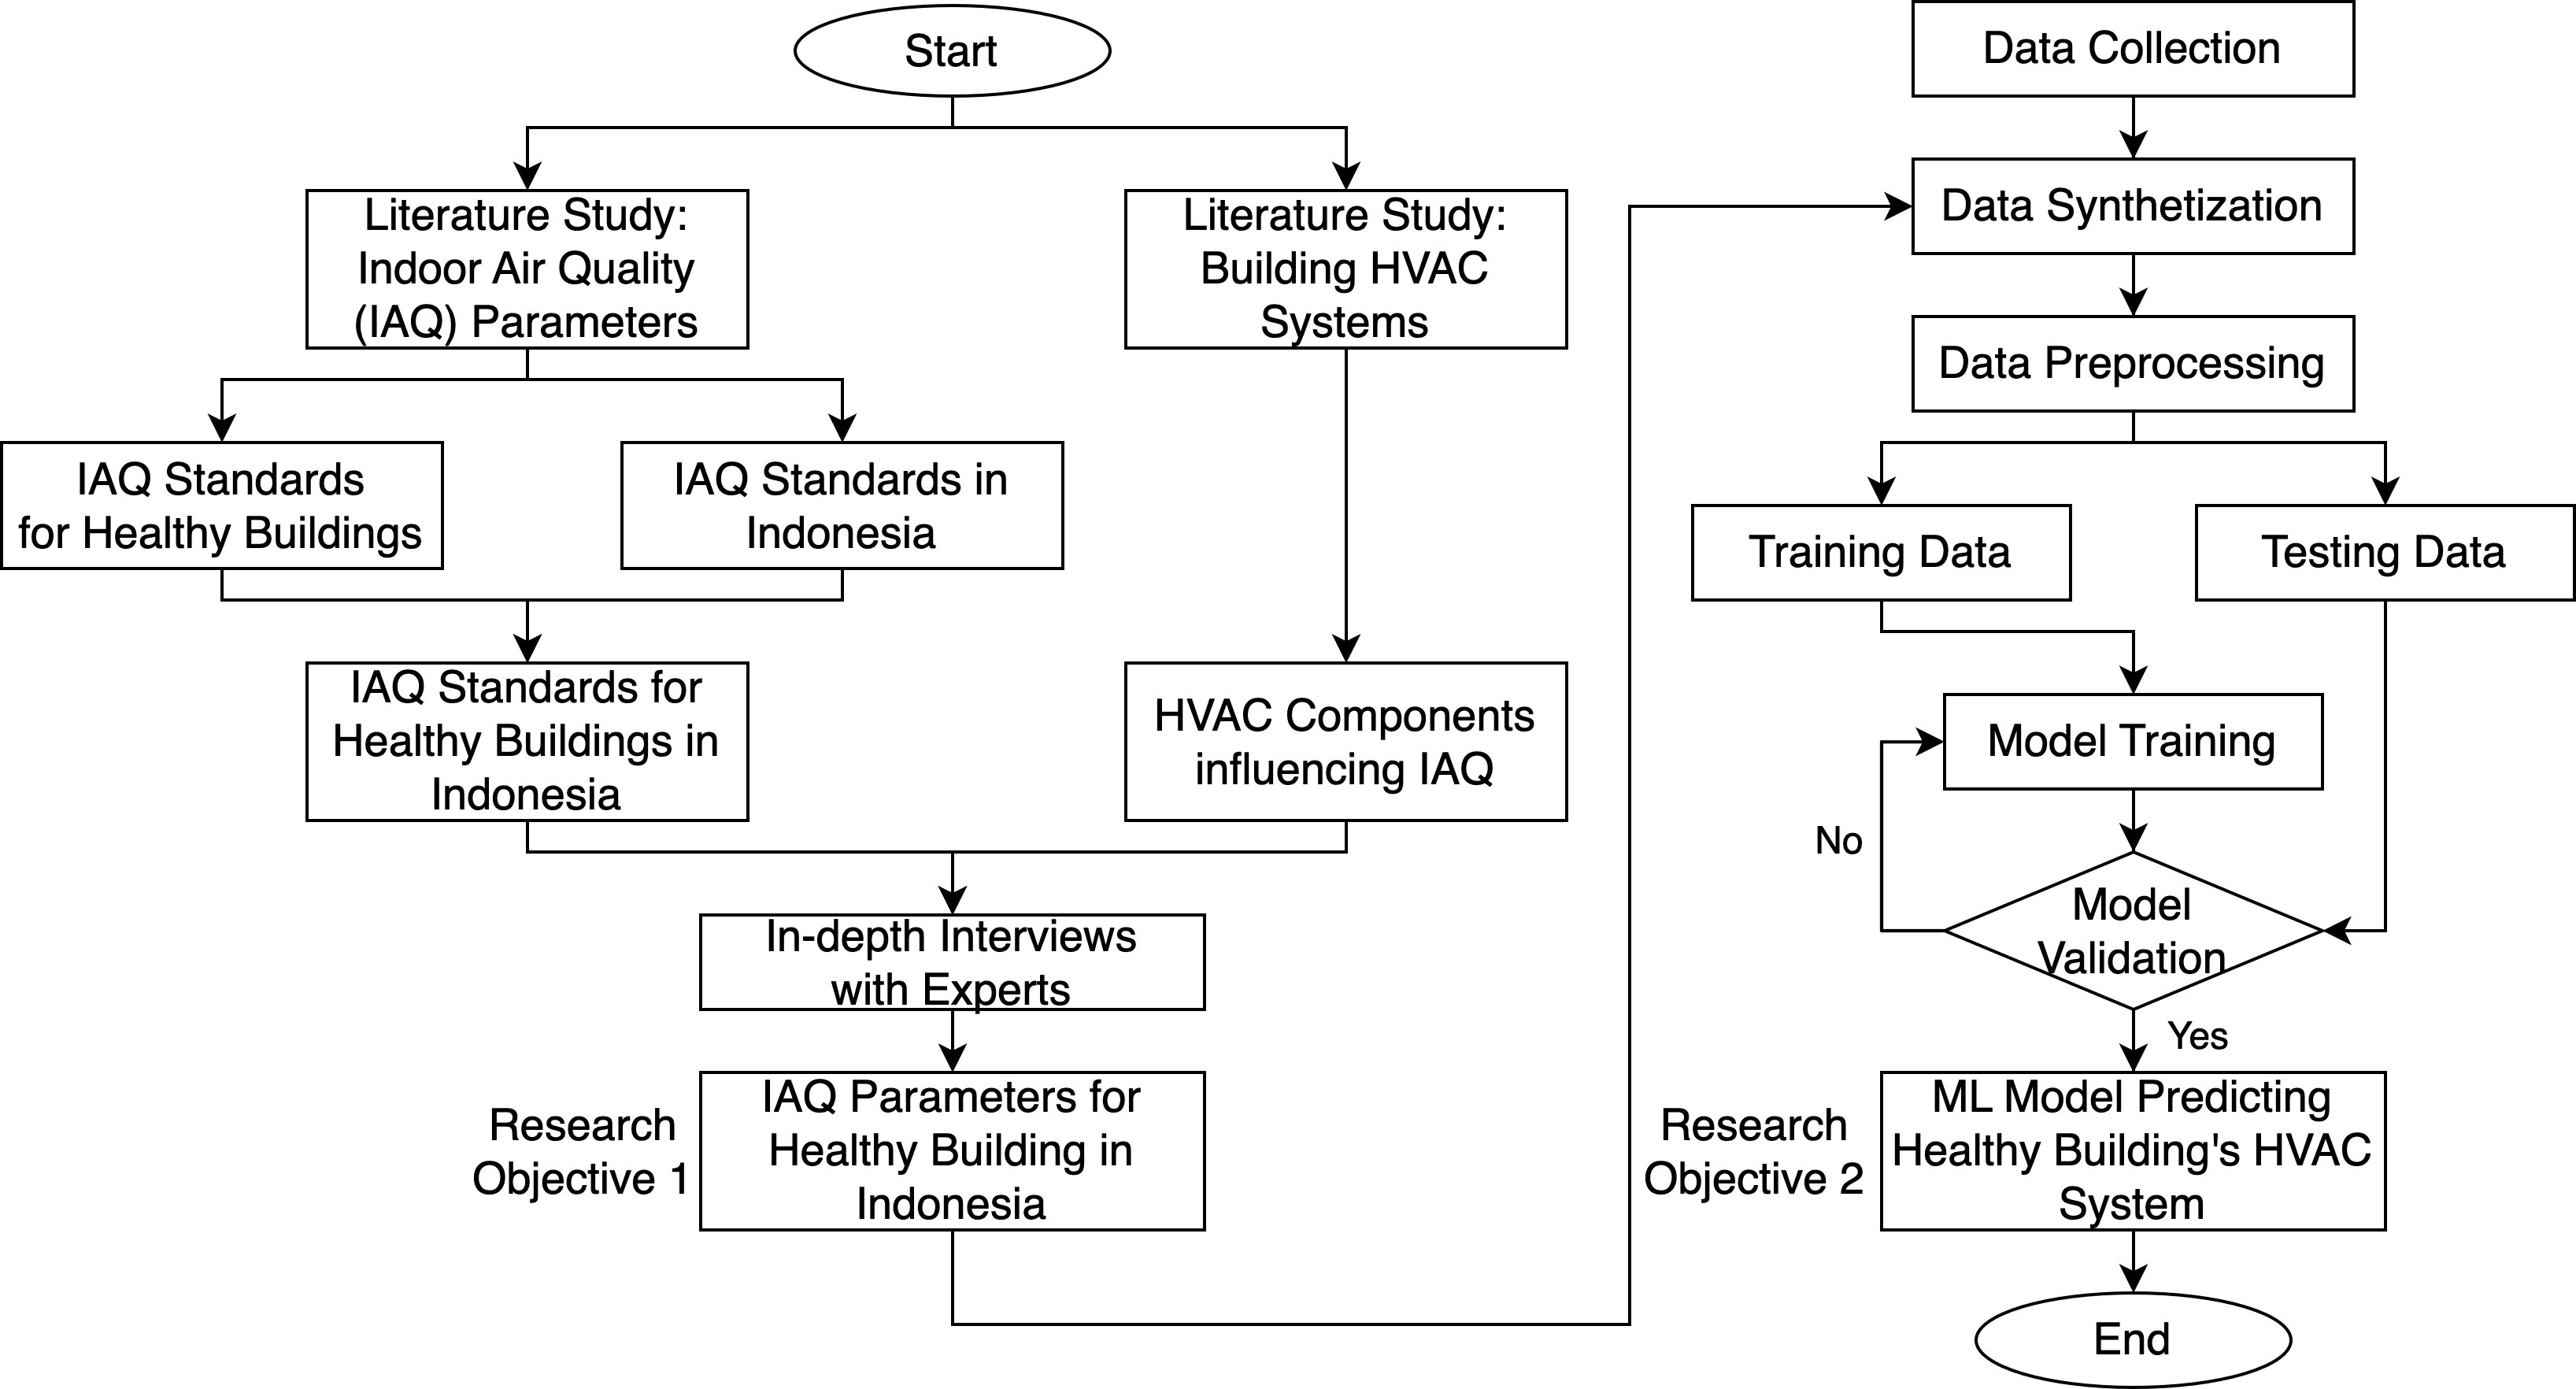 Developing Machine Learning Model to Predict HVAC System of